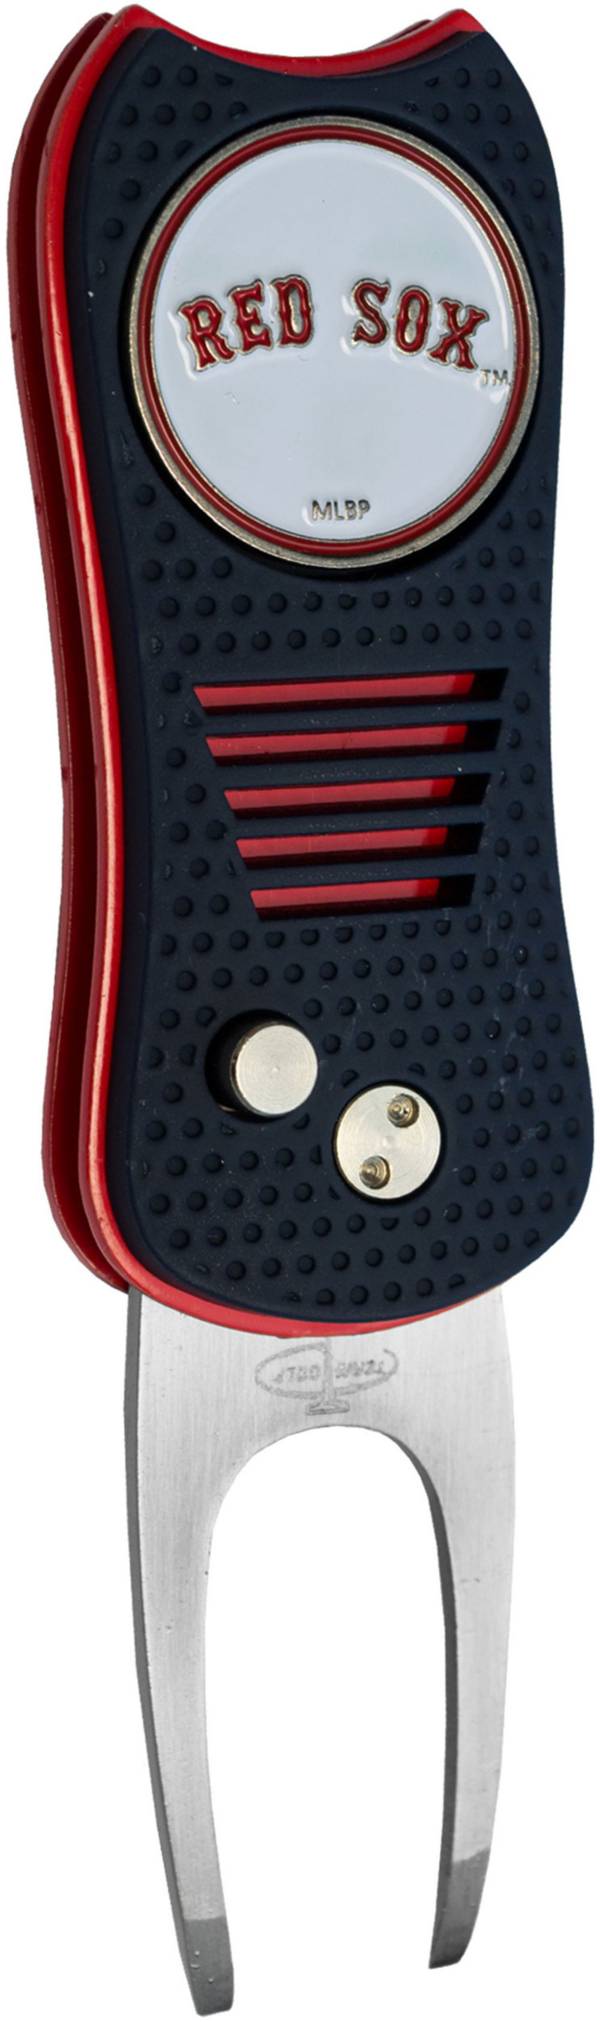 Team Golf Switchfix Boston Red Sox Divot Tool product image